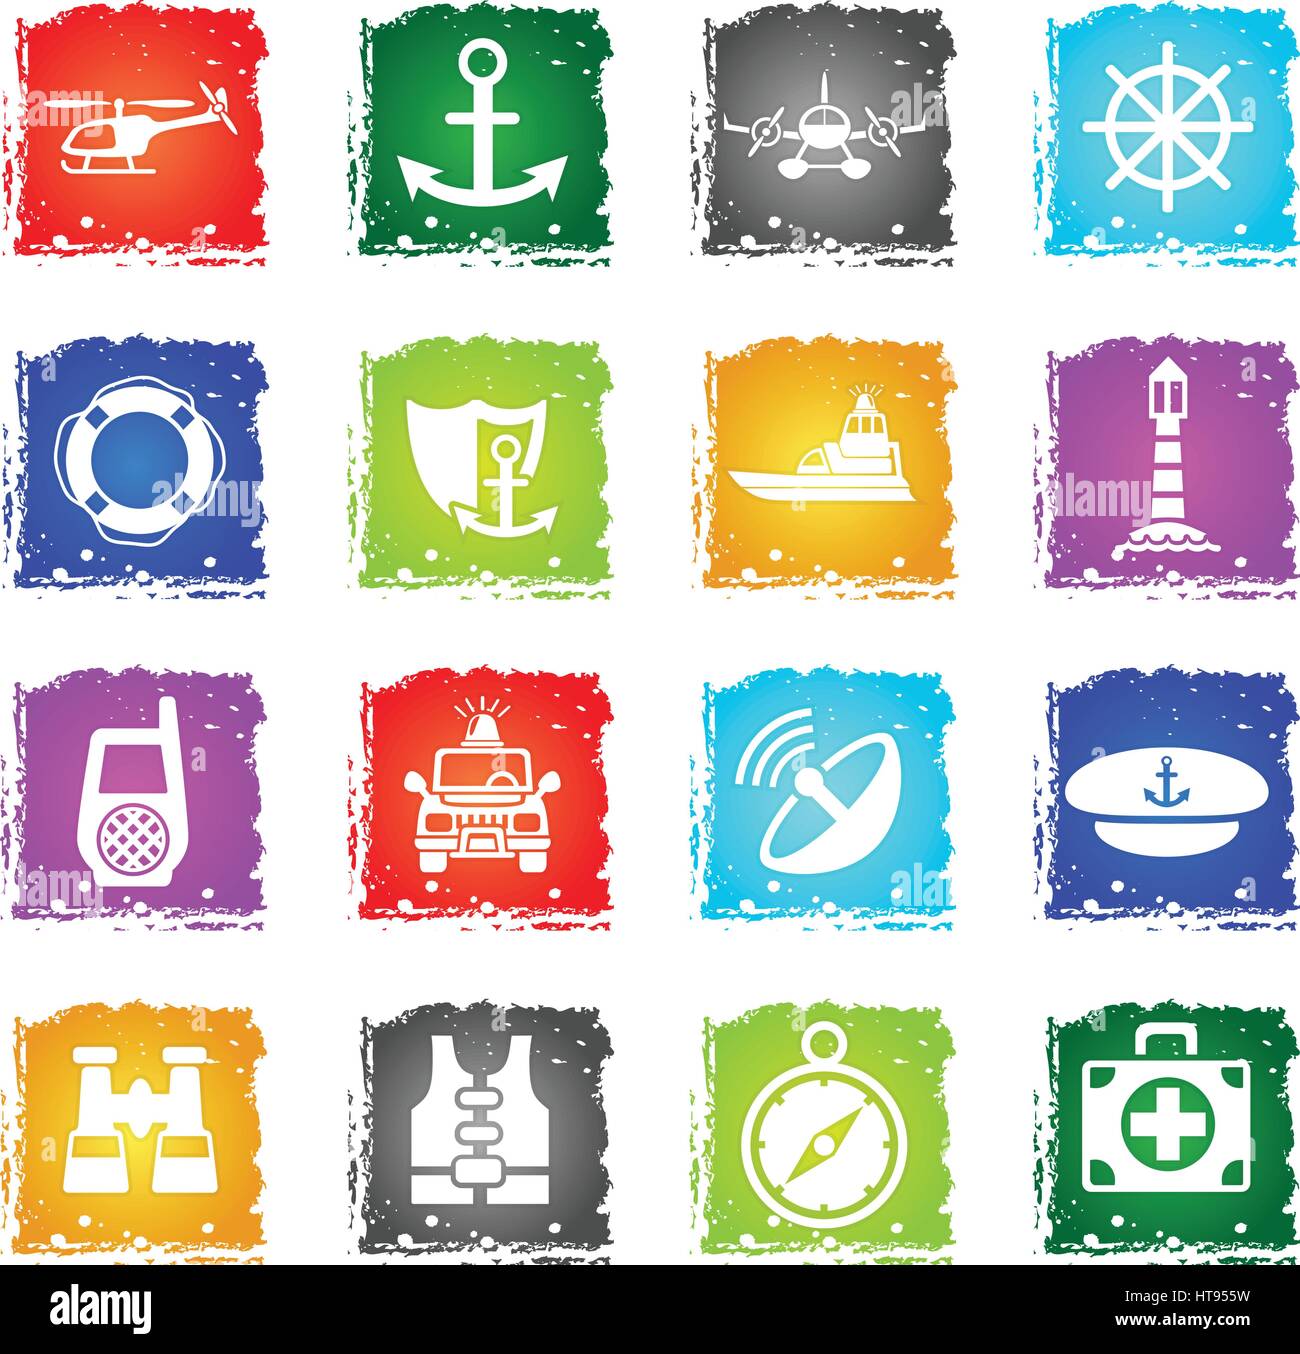 coastguard web icons in grunge style for user interface design Stock Vector